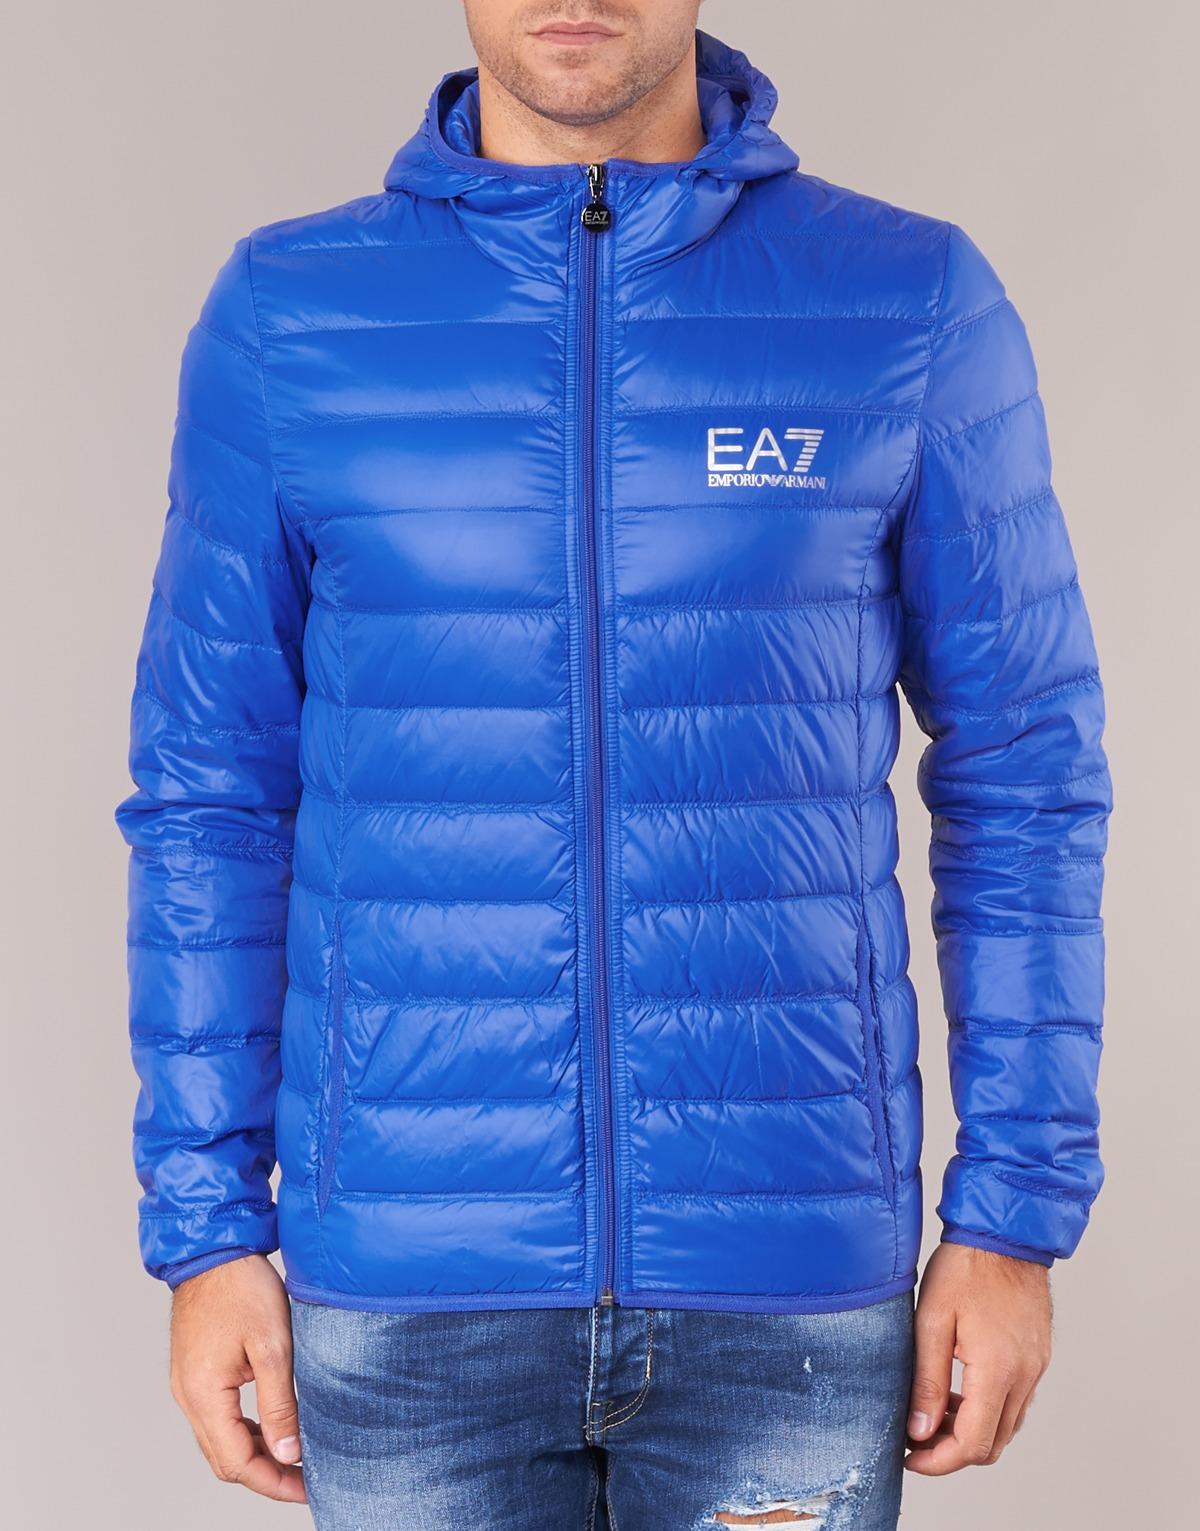 EA7 Core Id 8npb02 Jacket in Blue for Men - Save 26% - Lyst